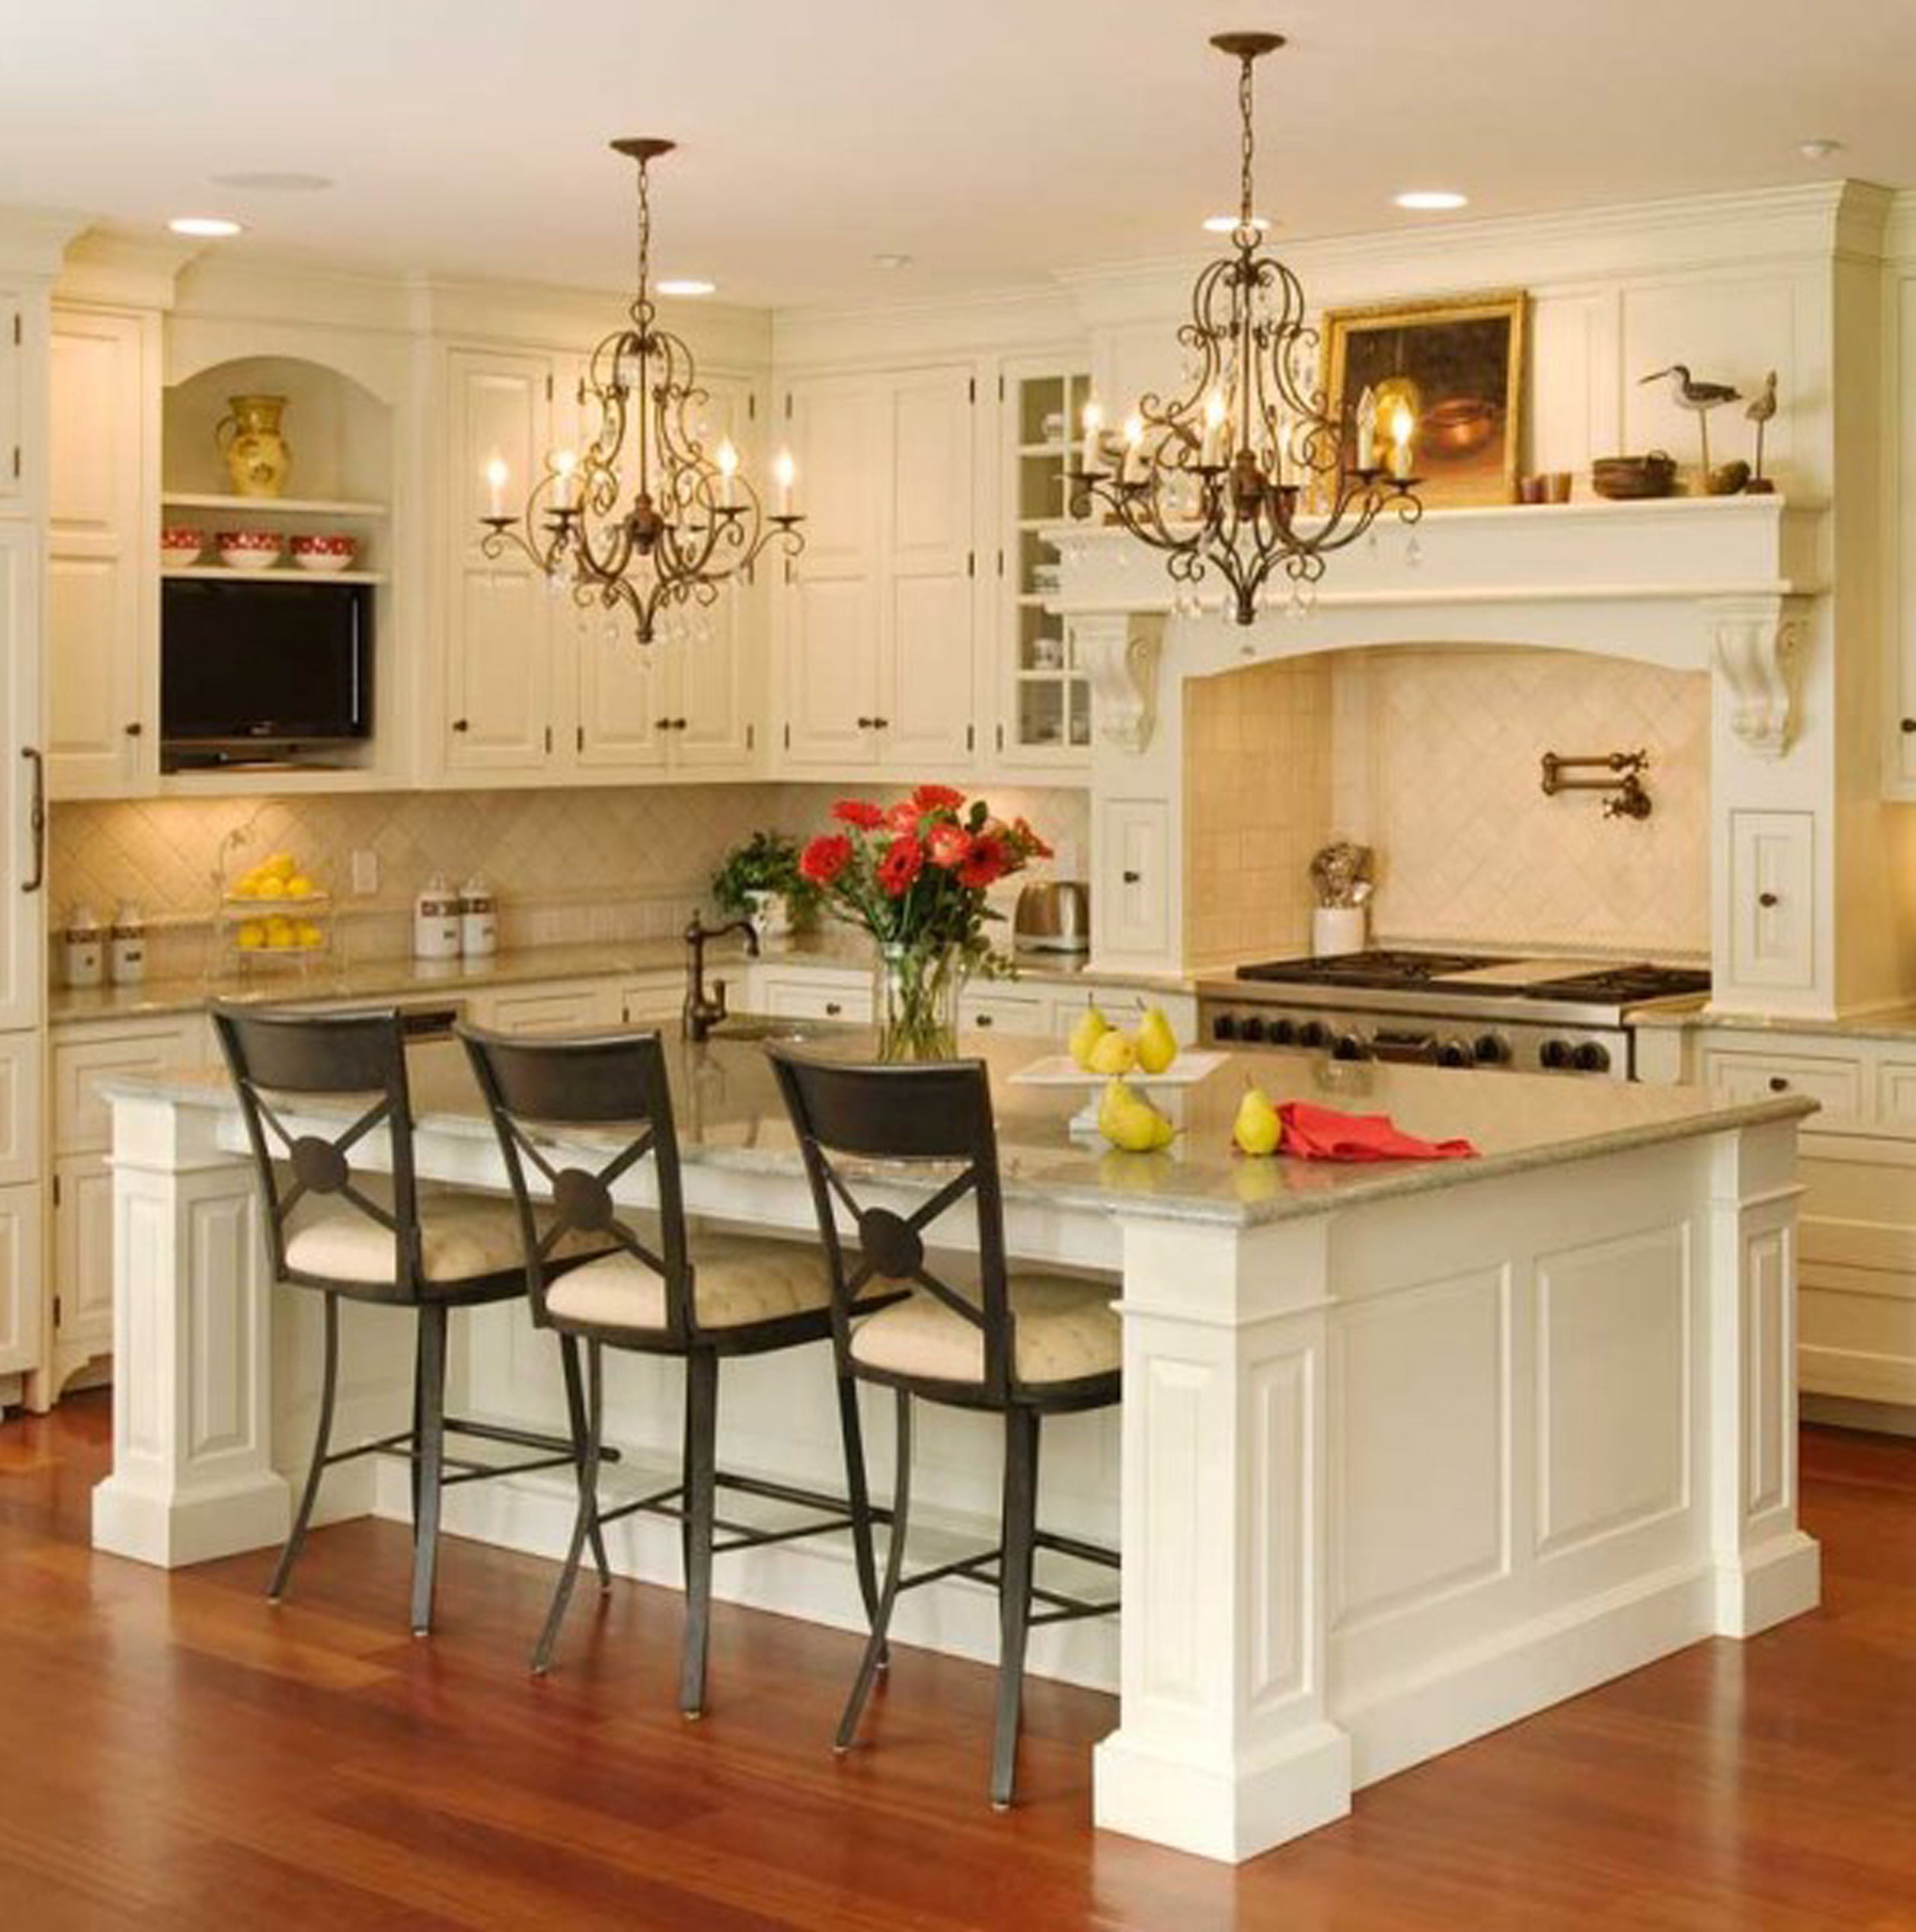 kitchen decorating french country island chandeliers tips lighting kitchens designs idea cabinets retro nice